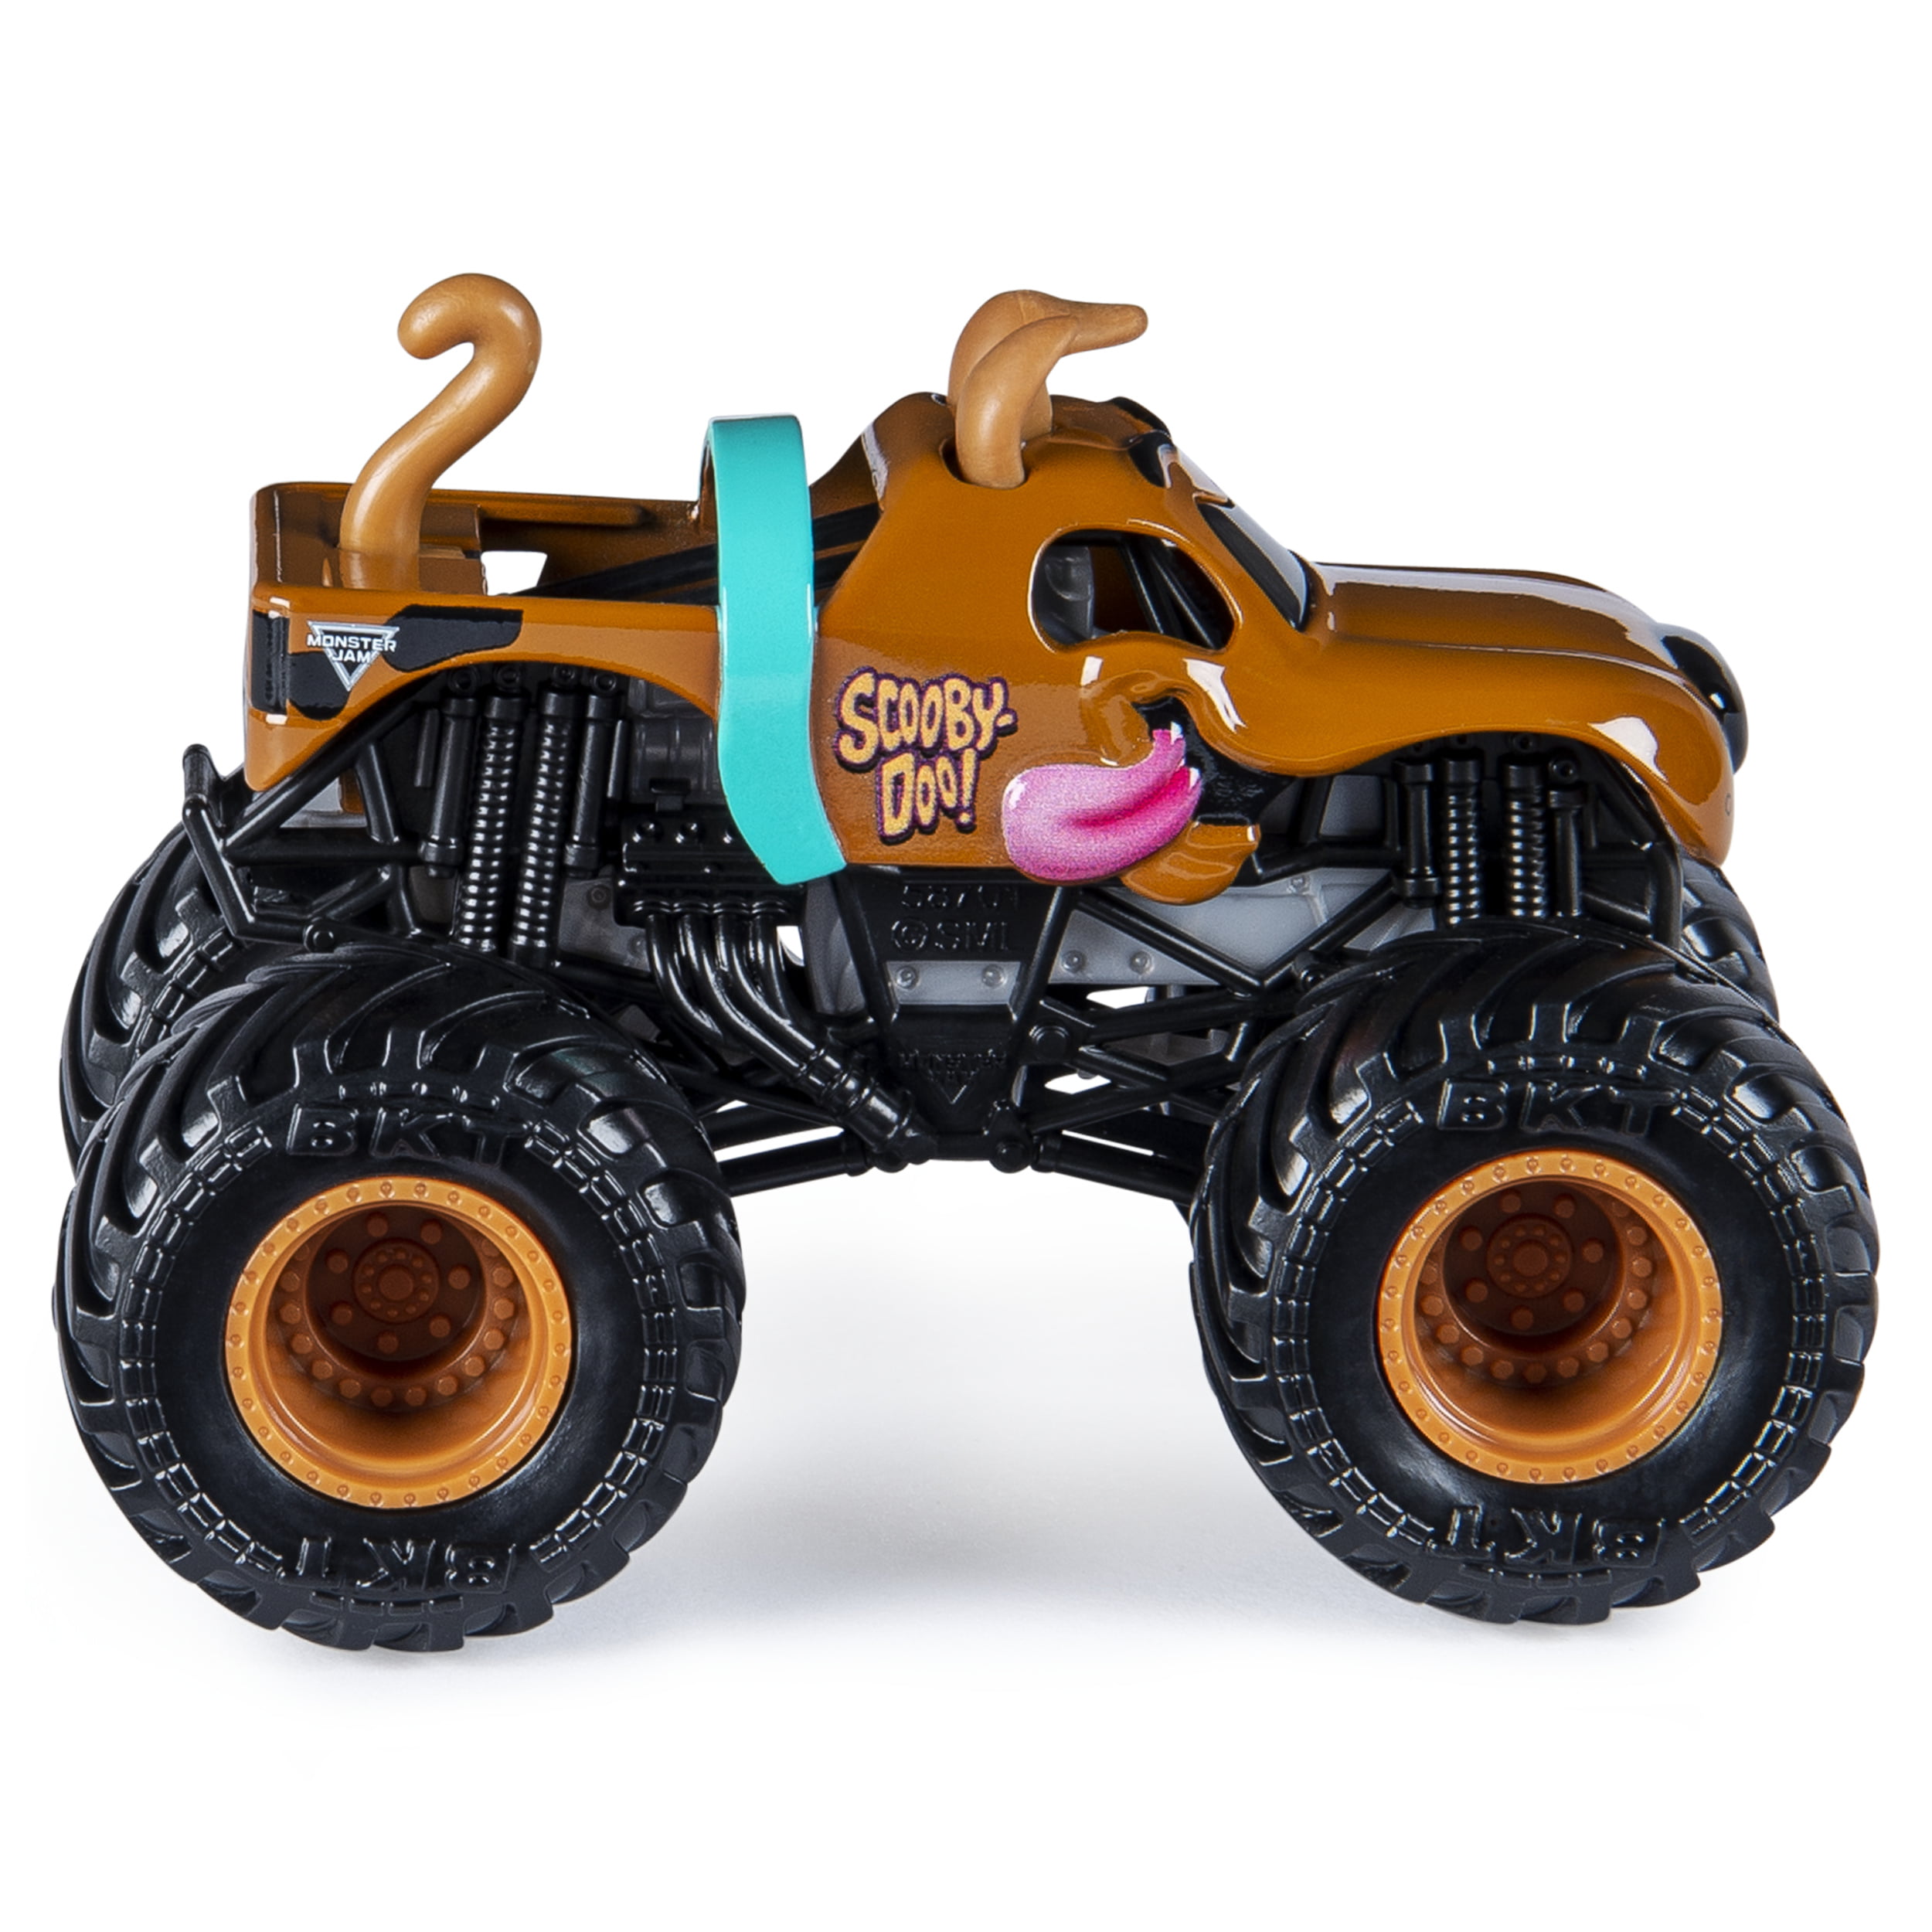 Scooby Doo Monster Truck Toy Promotions